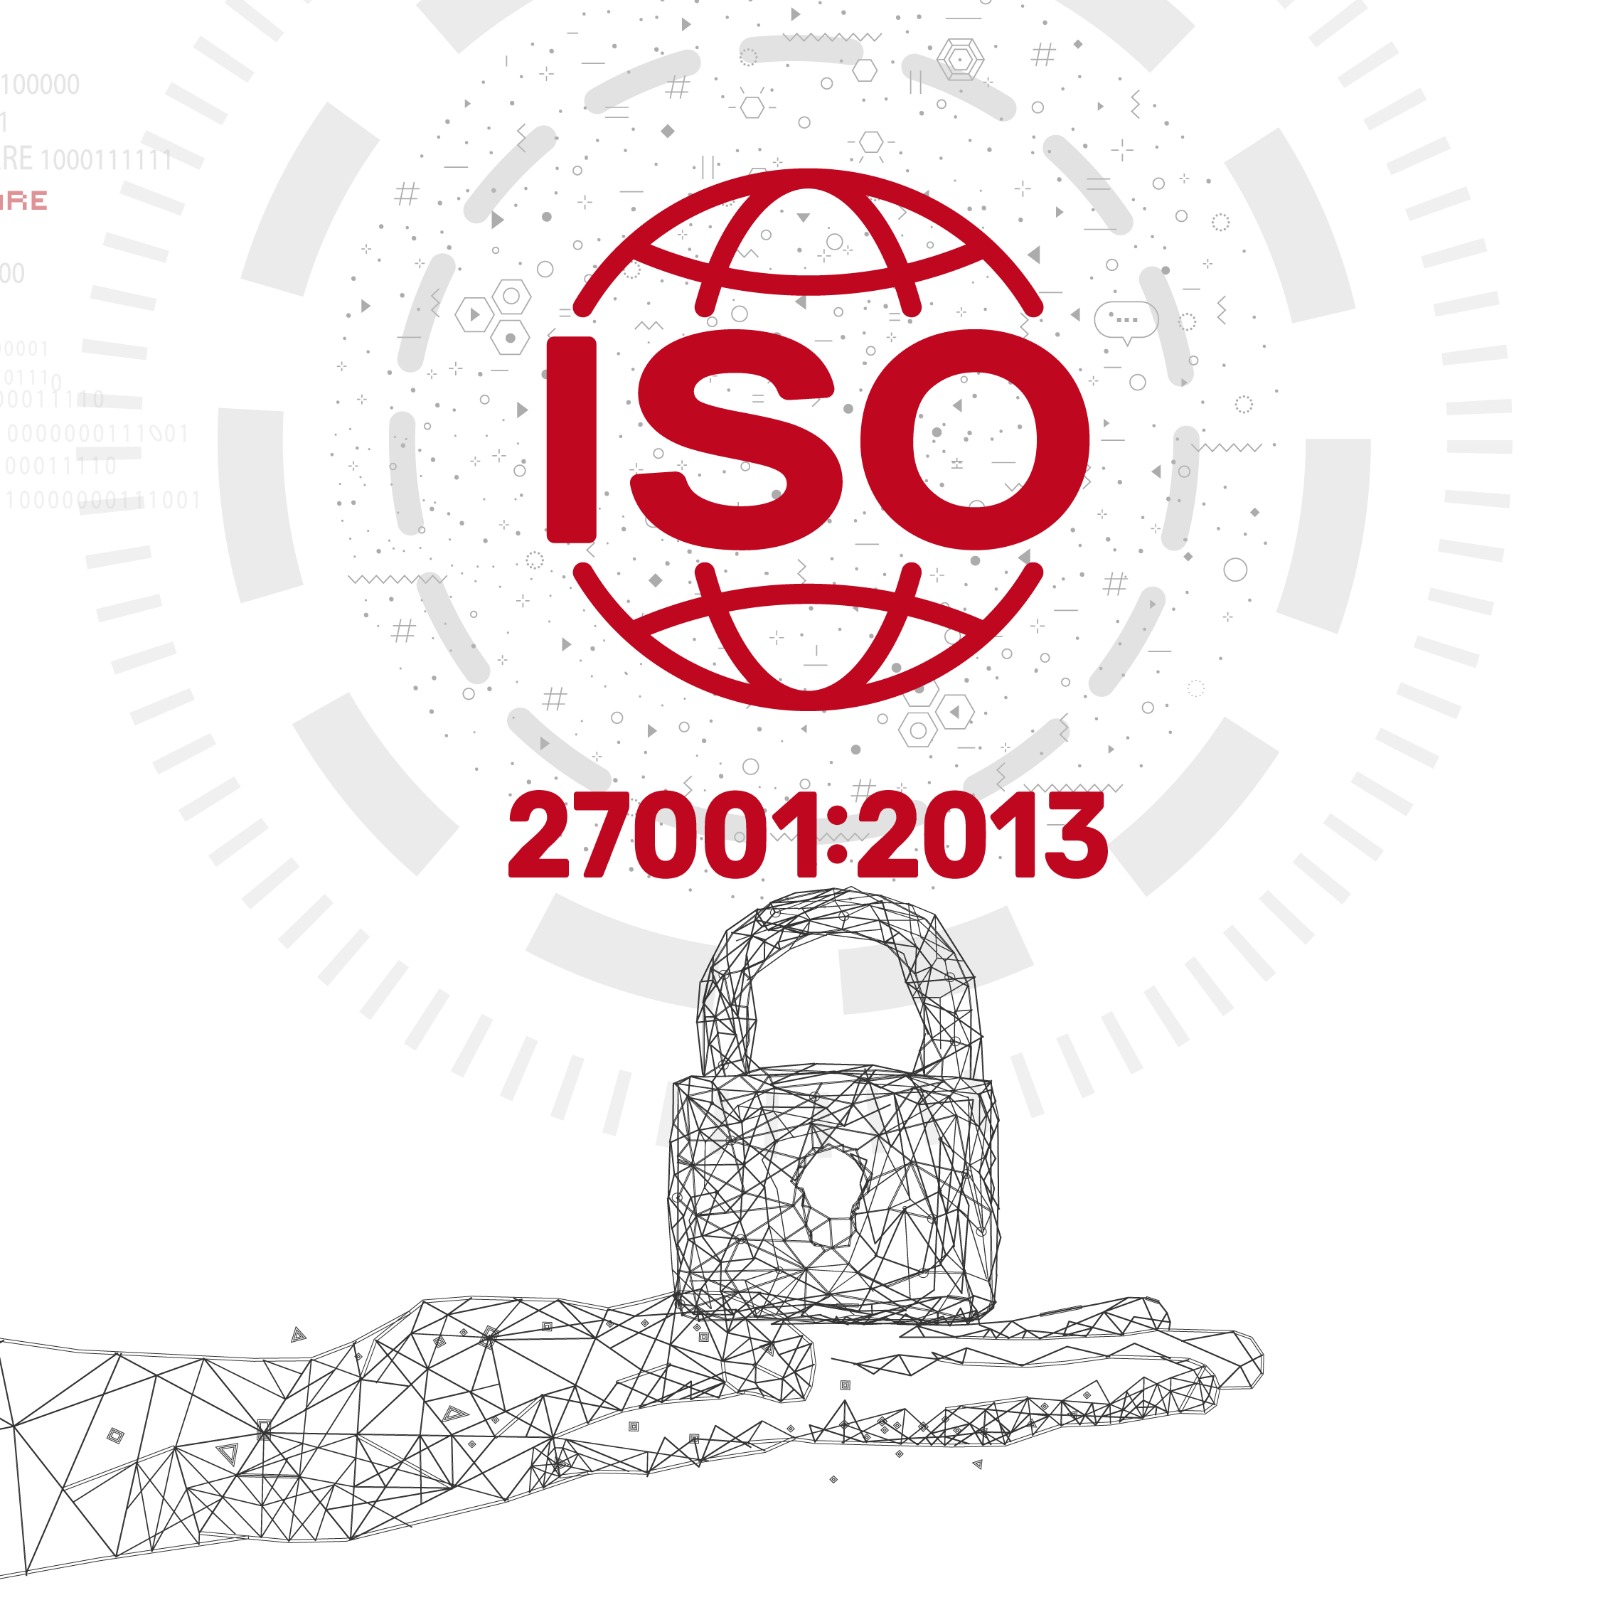 malomatia Achieves the Continuation of ISO 27001:2013 Certificate